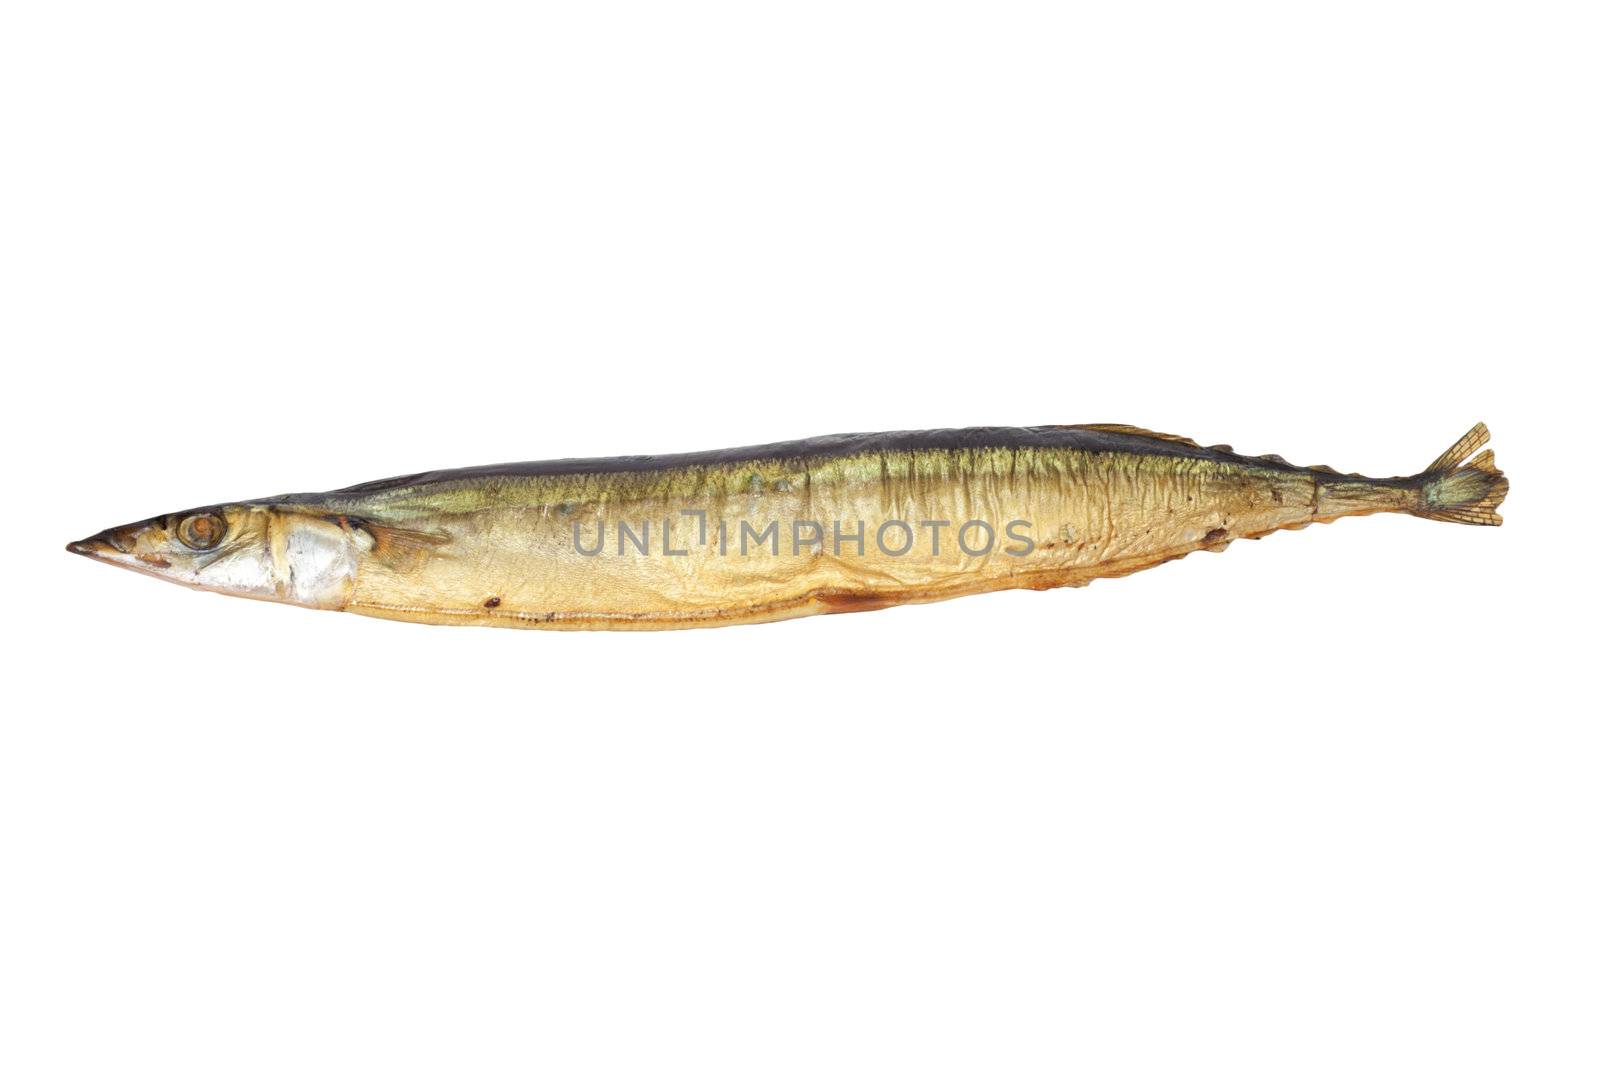 Smoked Saury on a white background by schankz